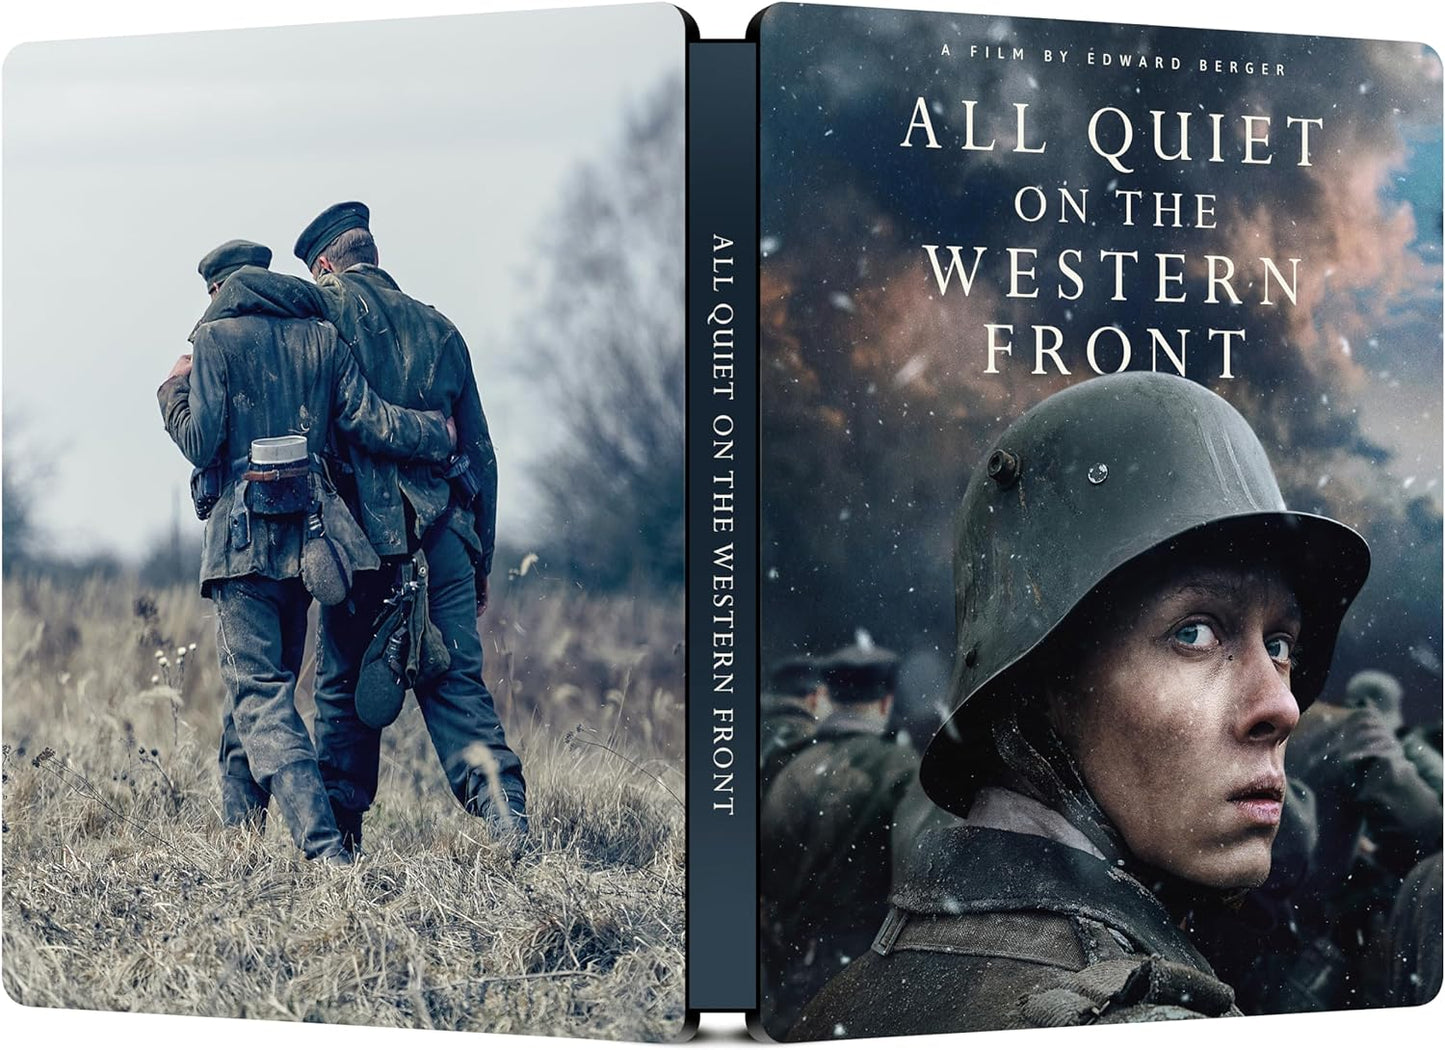 All Quiet on the Western Front 4K UHD + Blu-ray Embossed SteelBook (Altitude/Region Free/B)